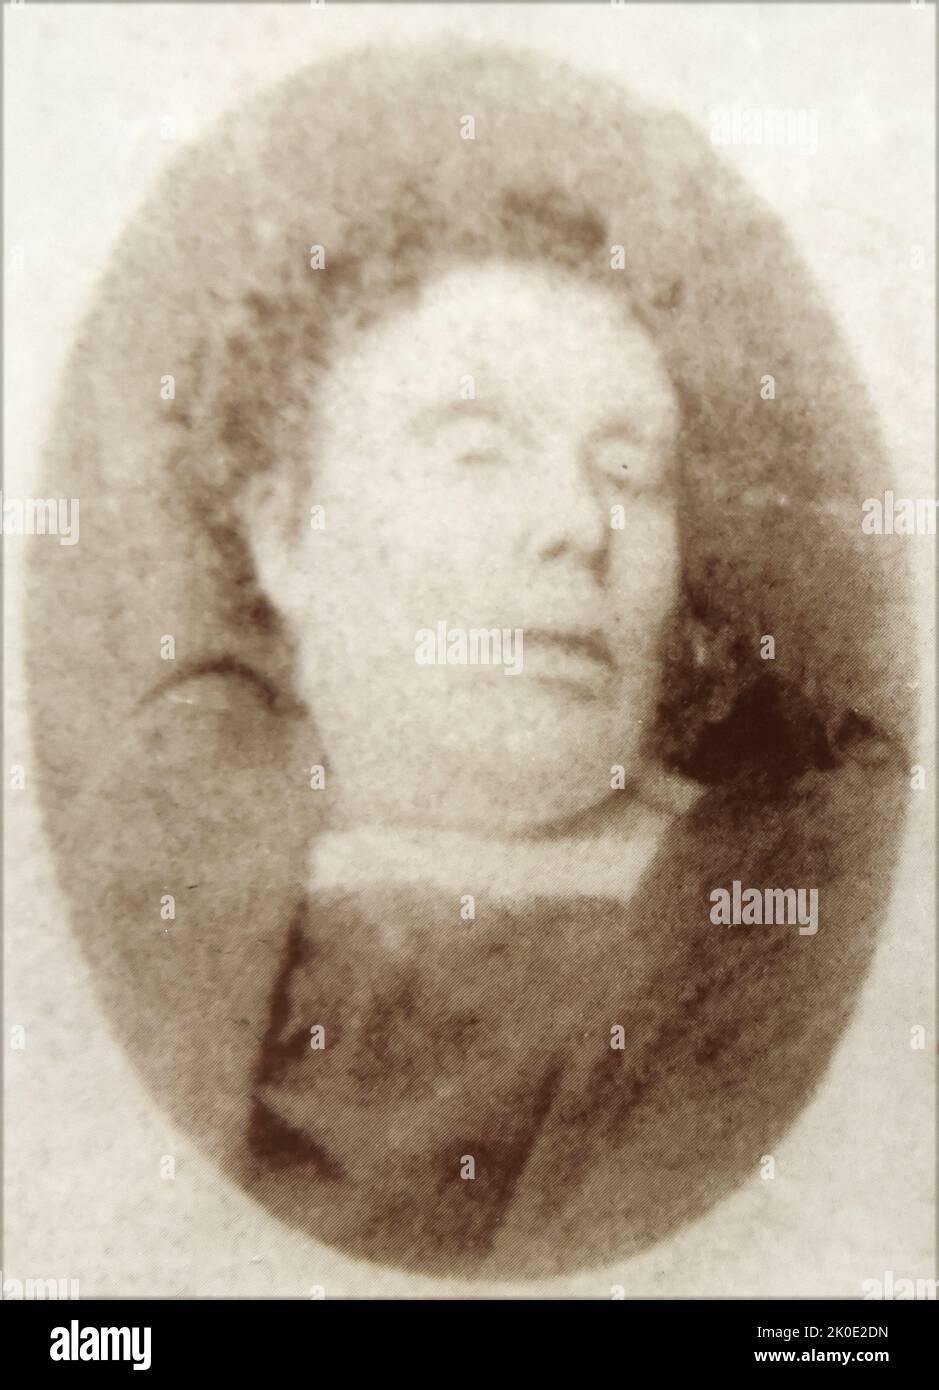 Annie Chapman (1840 - 8 September 1888) second victim of the notorious unidentified serial killer Jack the Ripper, who killed and mutilated a minimum of five women in the Whitechapel and Spitalfields districts of London from late August to early November 1888. Stock Photo